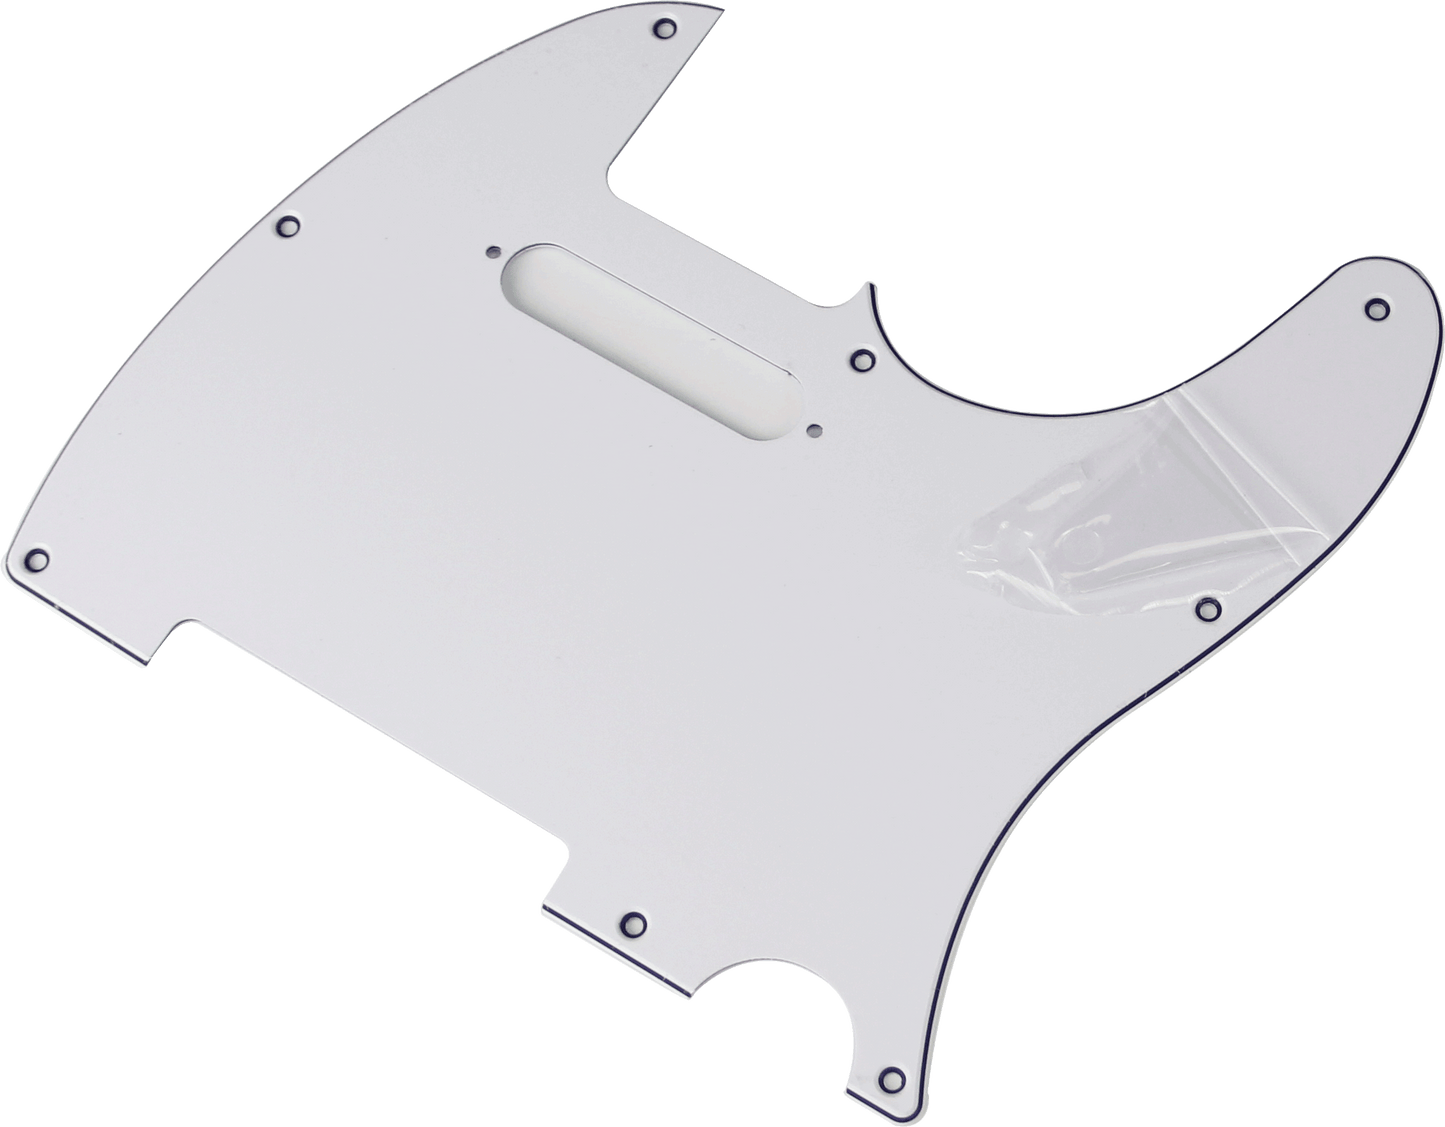 FLEOR TL Guitar Pickguard with Screws for Tele Style Guitar